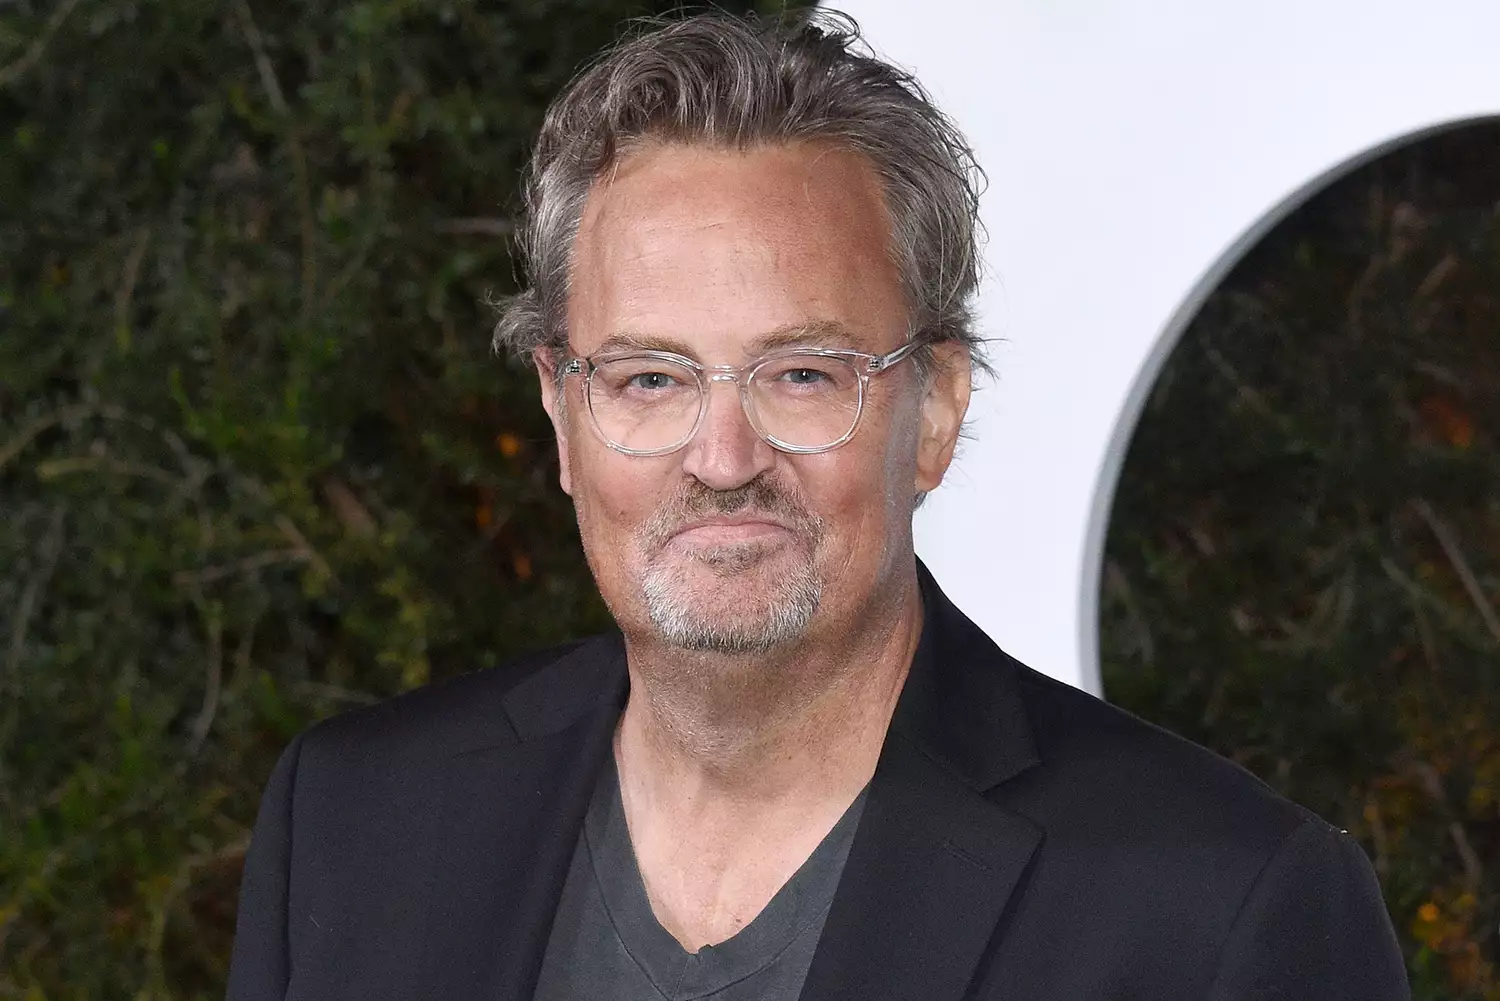 matthew perry 101623 8d006d94392c4987bce4250c4250a6e7 - WTX News Breaking News, fashion & Culture from around the World - Daily News Briefings -Finance, Business, Politics & Sports News